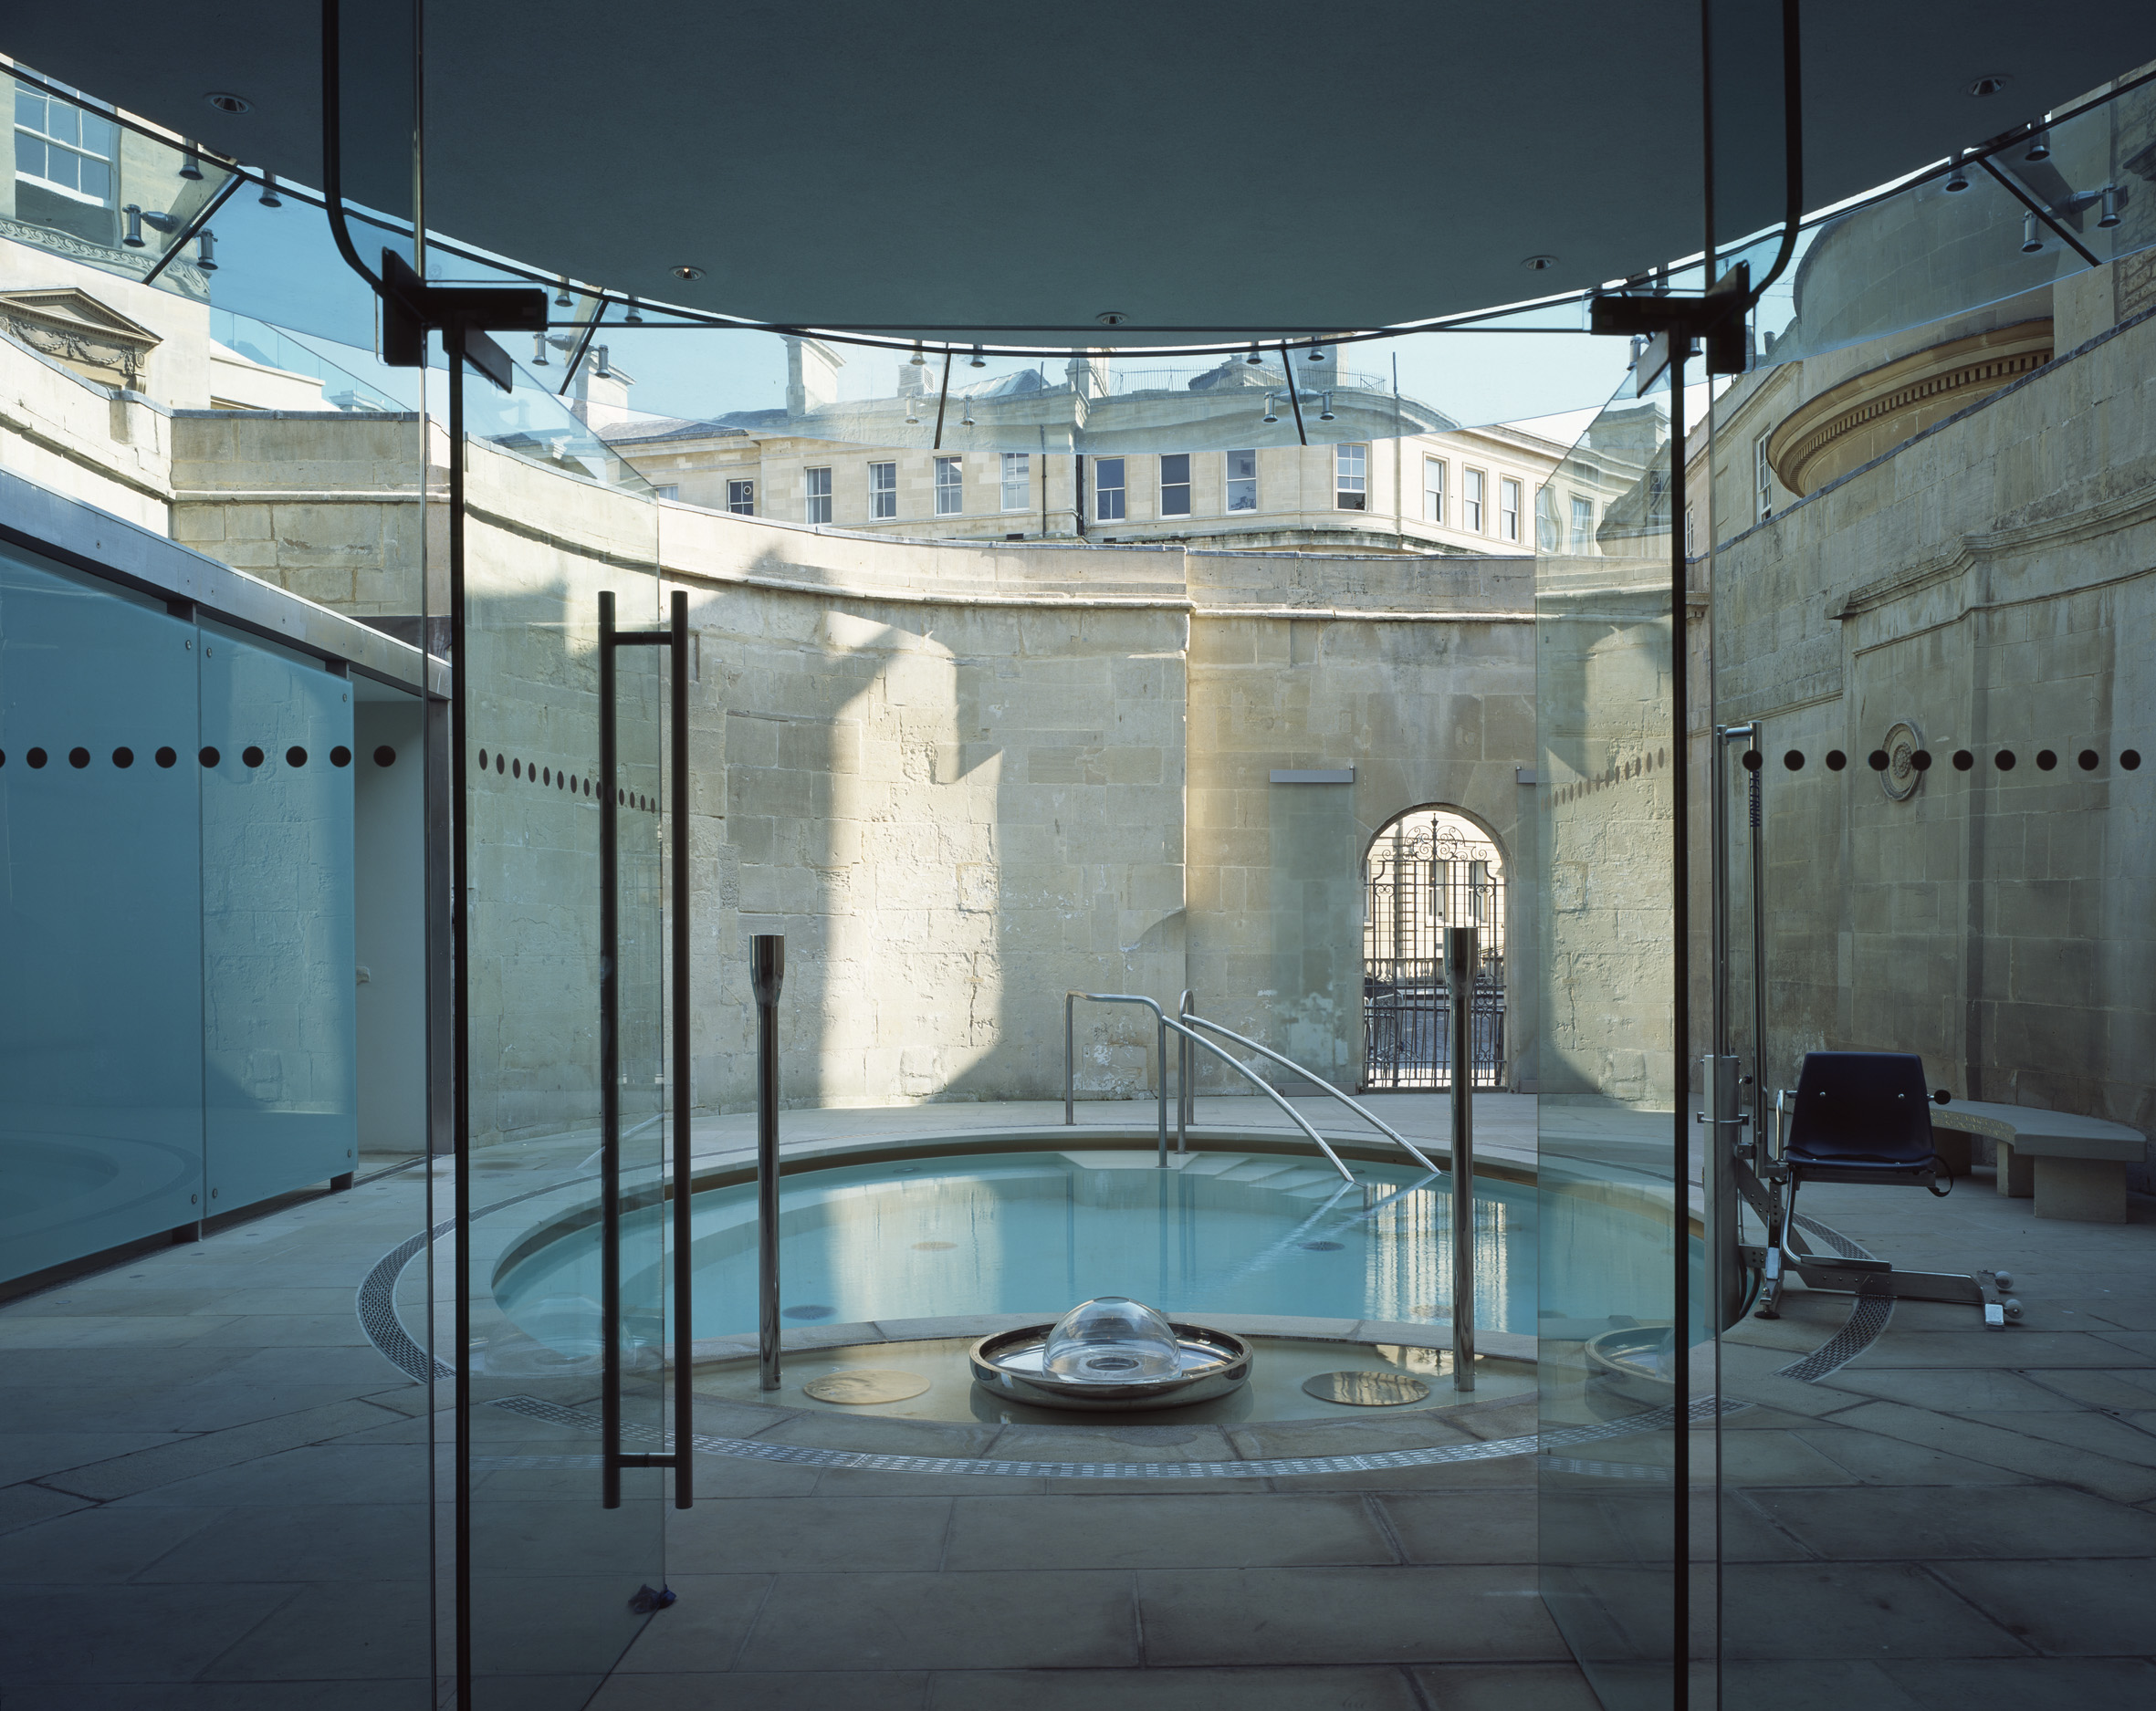 Bath Spa Private Hire. Privacy And Relaxation Next to the 